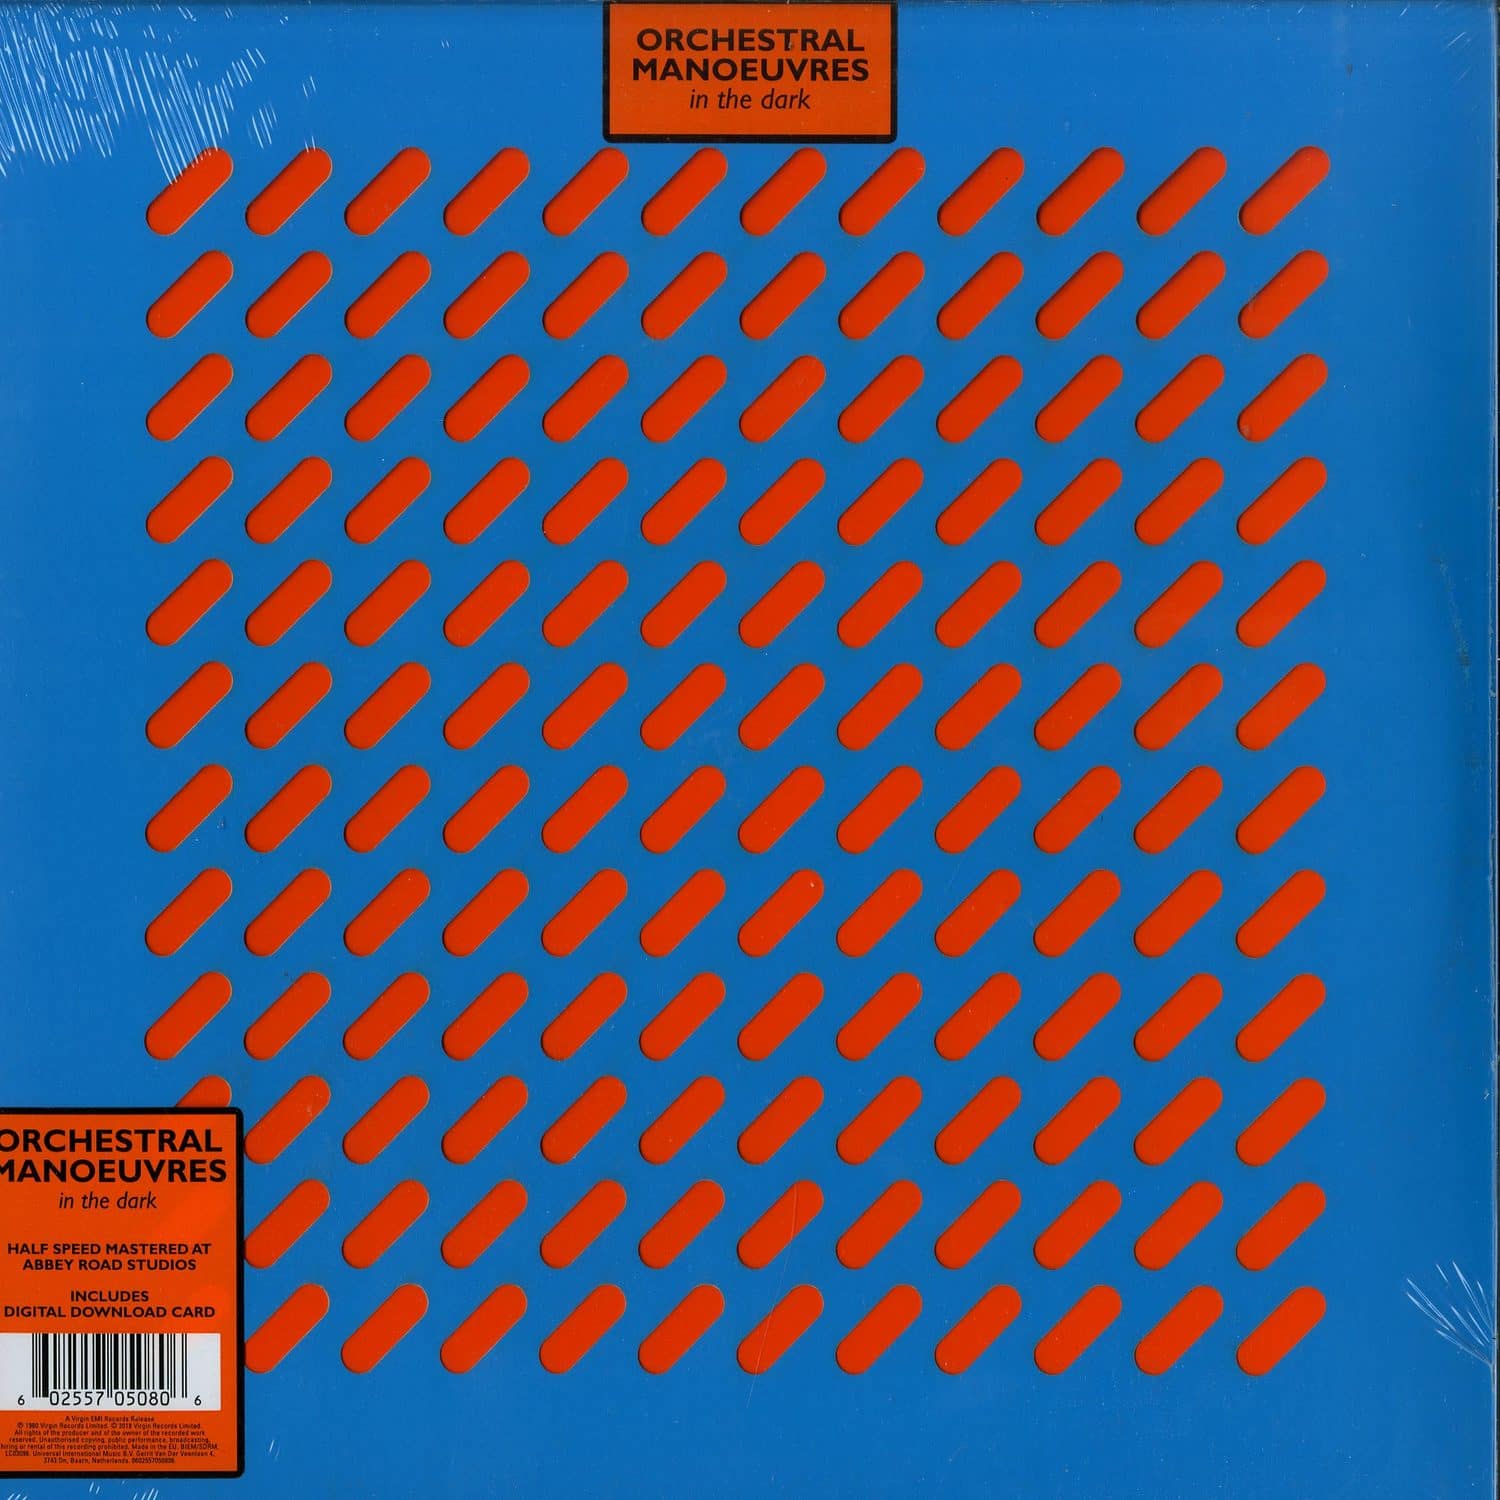 Orchestral Manoeuvres In The Dark - ORCHESTRAL MANOEUVRES IN THE DARK 